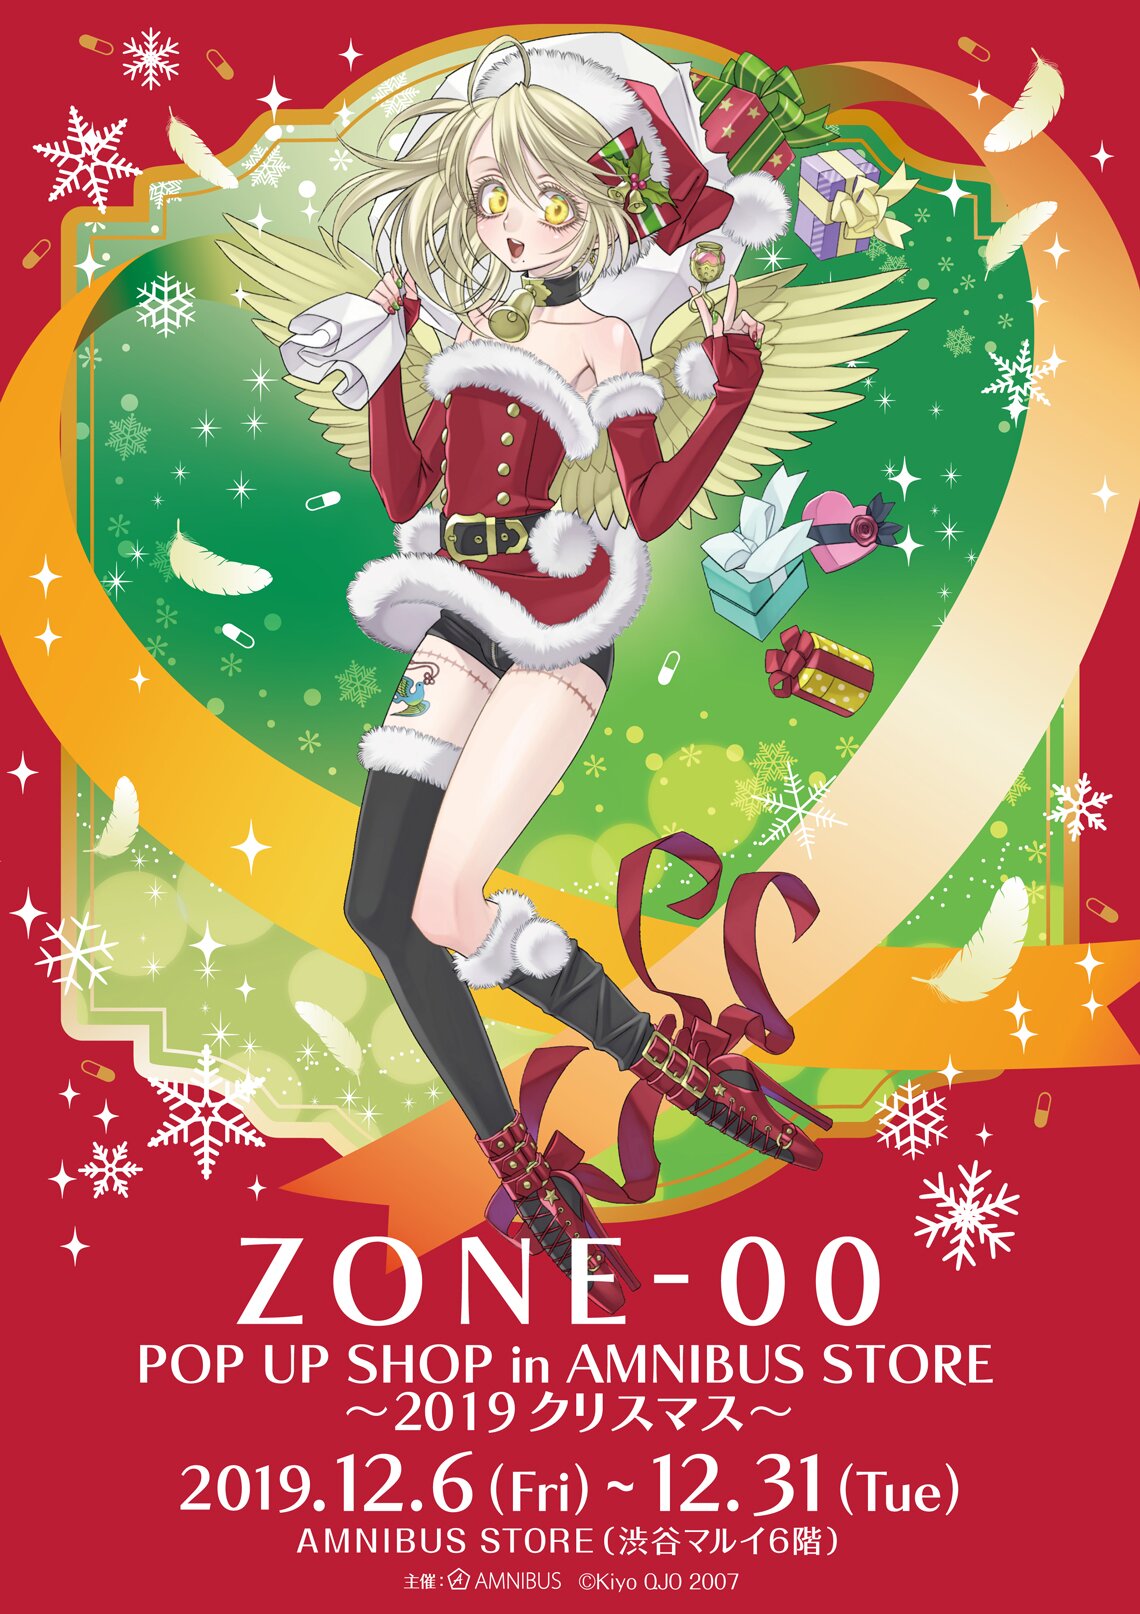 「『ZONE-00』 POP UP SHOP in AMNIBUS STORE～2019 クリスマス～」スタート！